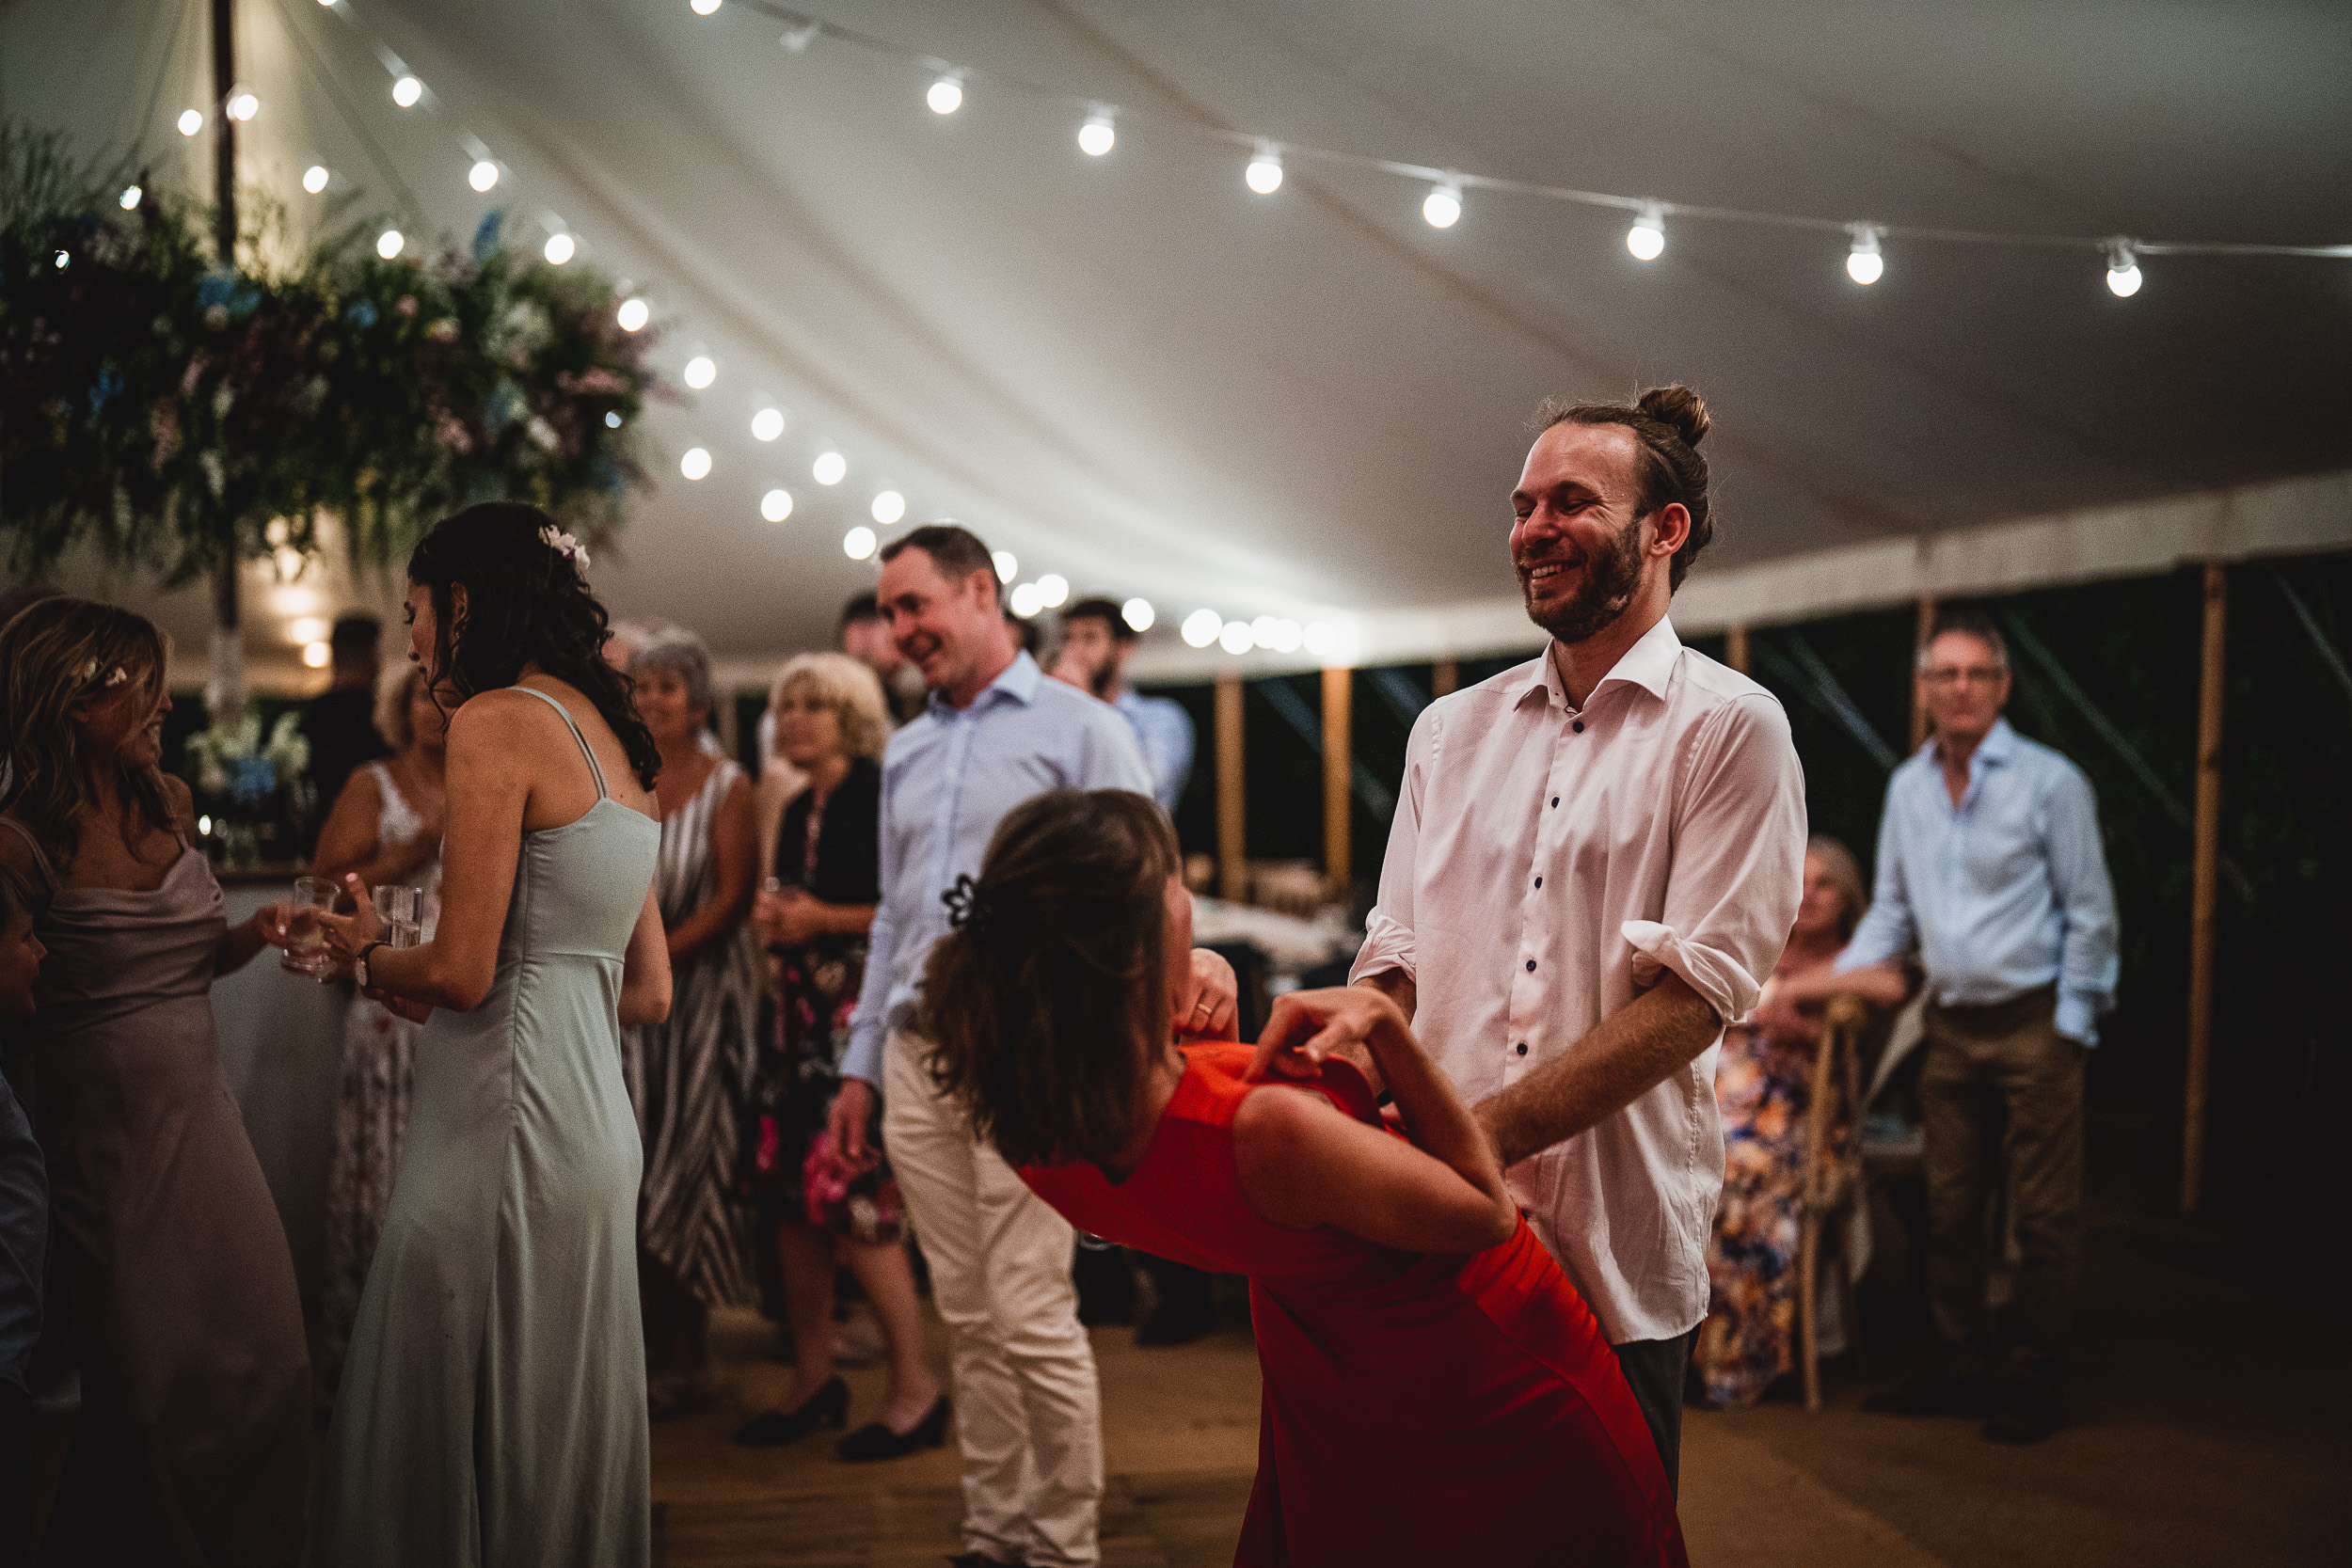 A couple dancing in a tent at their wedding, captured by a wedding photographer.